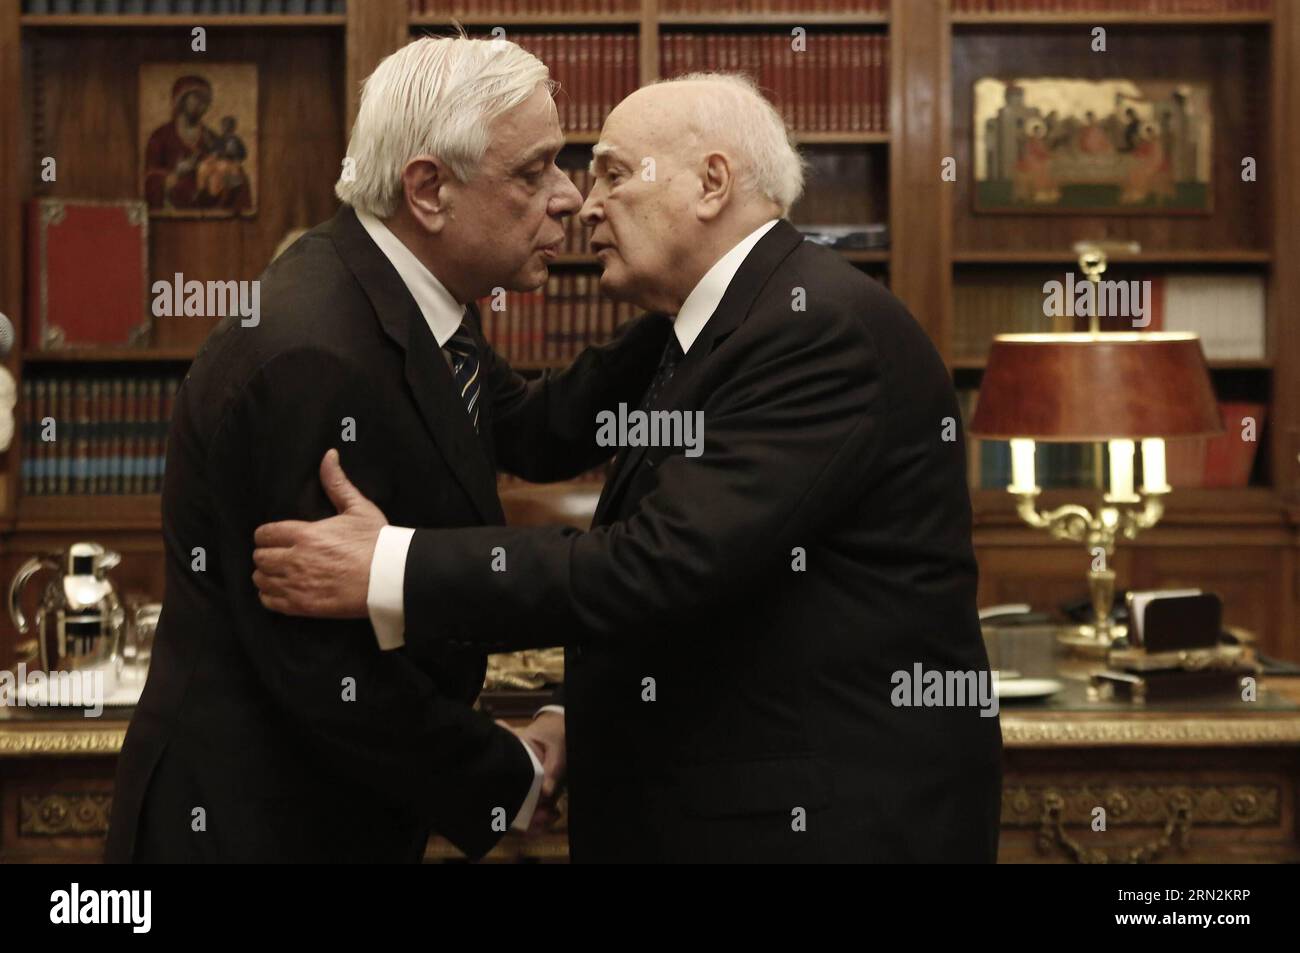 (150313) -- ATHENS, March 13, 2015 -- Outgoing Greek President Karolos Papoulias (R) hugs the newly elected President Prokopis Pavlopoulos during a handover ceremony at the Presidential Palace in Athens, Greece, on March 13, 2015. The new president of the Hellenic Republic, Prokopis Pavlopoulos, was sworn in on Friday. ) GREECE-ATHENS-POLITICS-NEW PRESIDENT YannisxKolesidis/Pool PUBLICATIONxNOTxINxCHN   Athens March 13 2015 Outgoing Greek President Karolos Papoulias r Hugs The newly Elected President Prokopis Pavlopoulos during a Handover Ceremony AT The Presidential Palace in Athens Greece ON Stock Photo